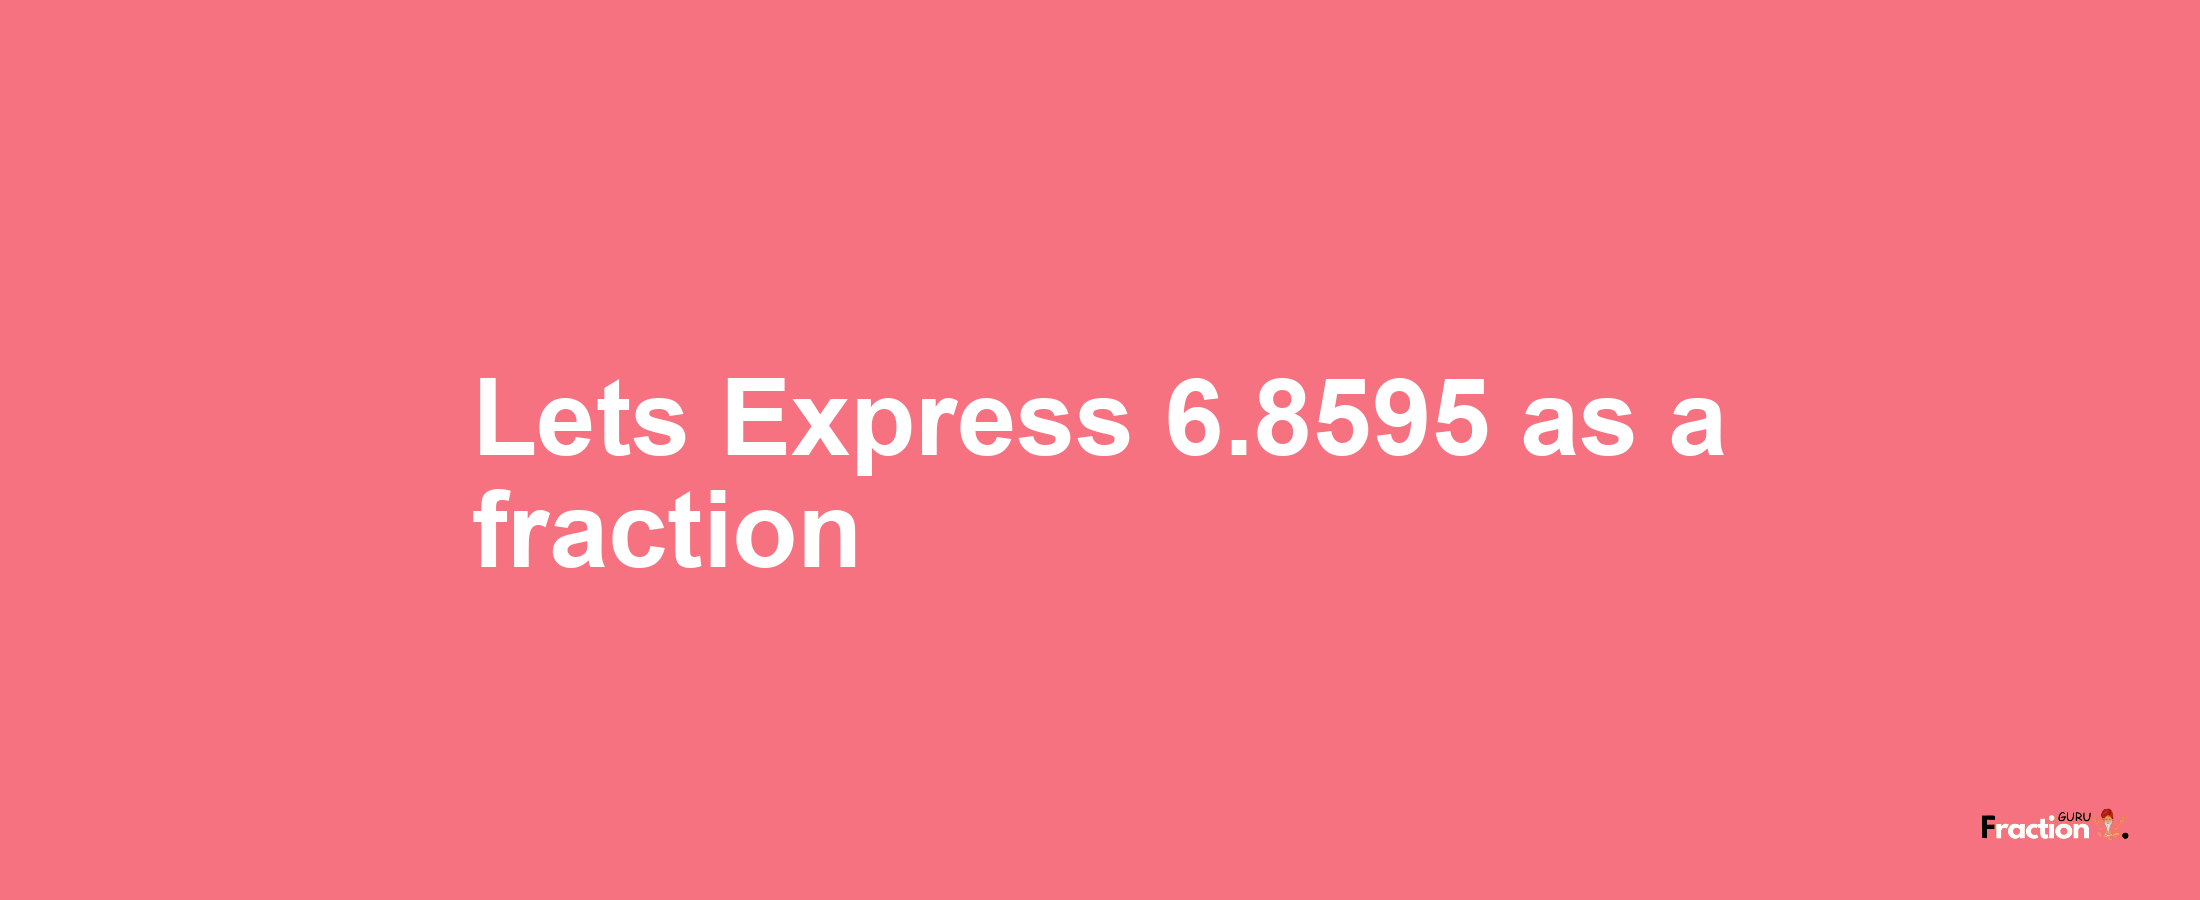 Lets Express 6.8595 as afraction